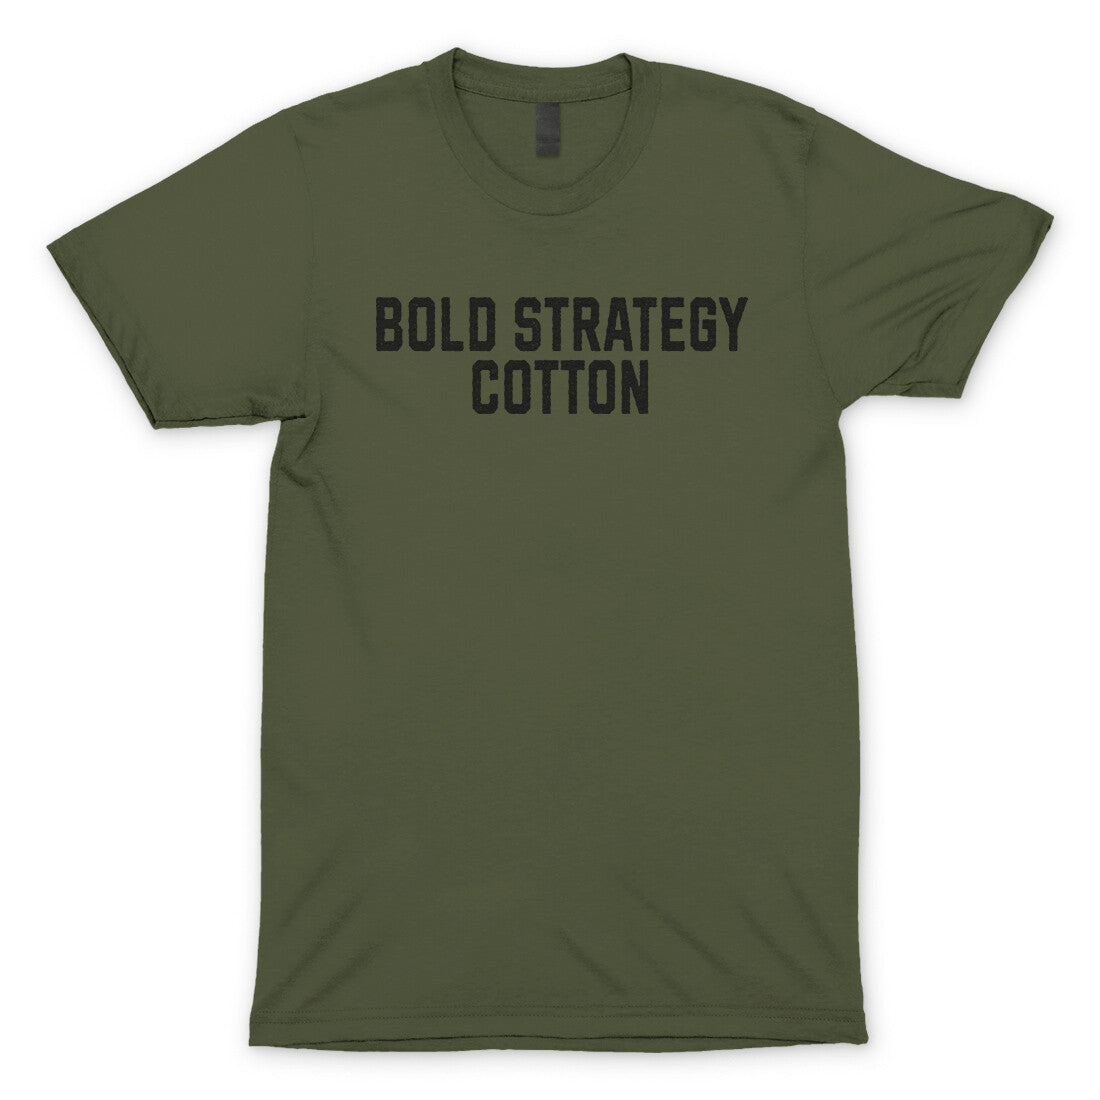 Bold Strategy Cotton in Military Green Color